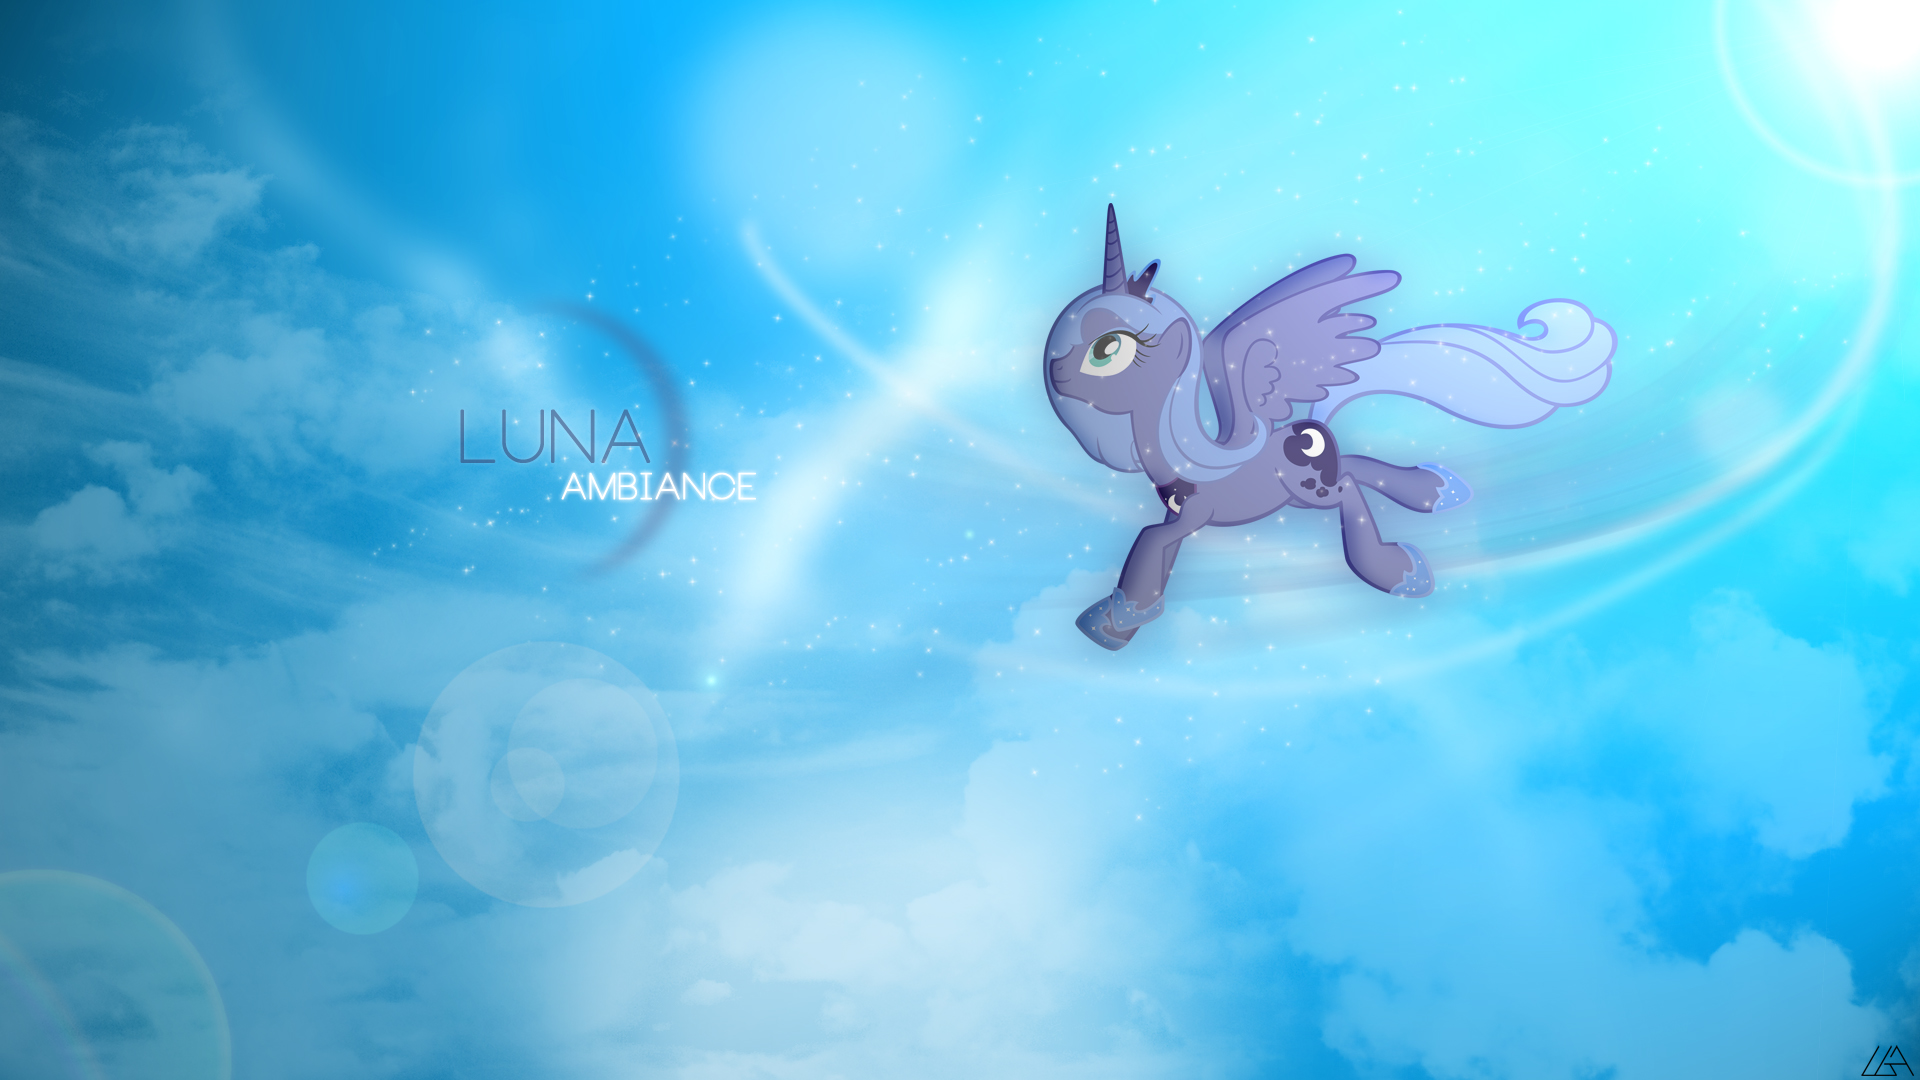 Luna Ambiance by LuGiAdriel14 and MoongazePonies